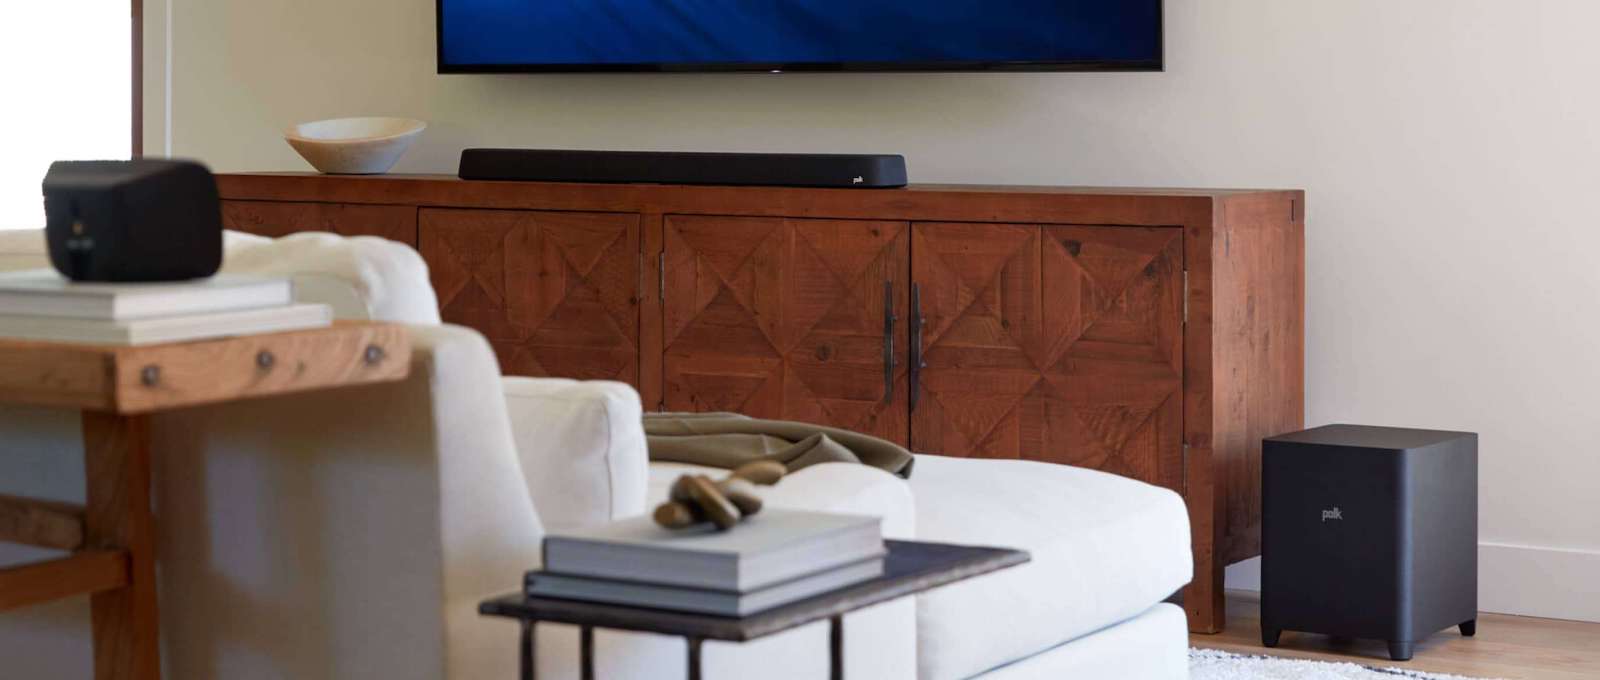 Polk Audio Introduces New MagniFi Max AX Sound Bar Systems With Dolby Atmos, DTS:X, and AirPlay 2